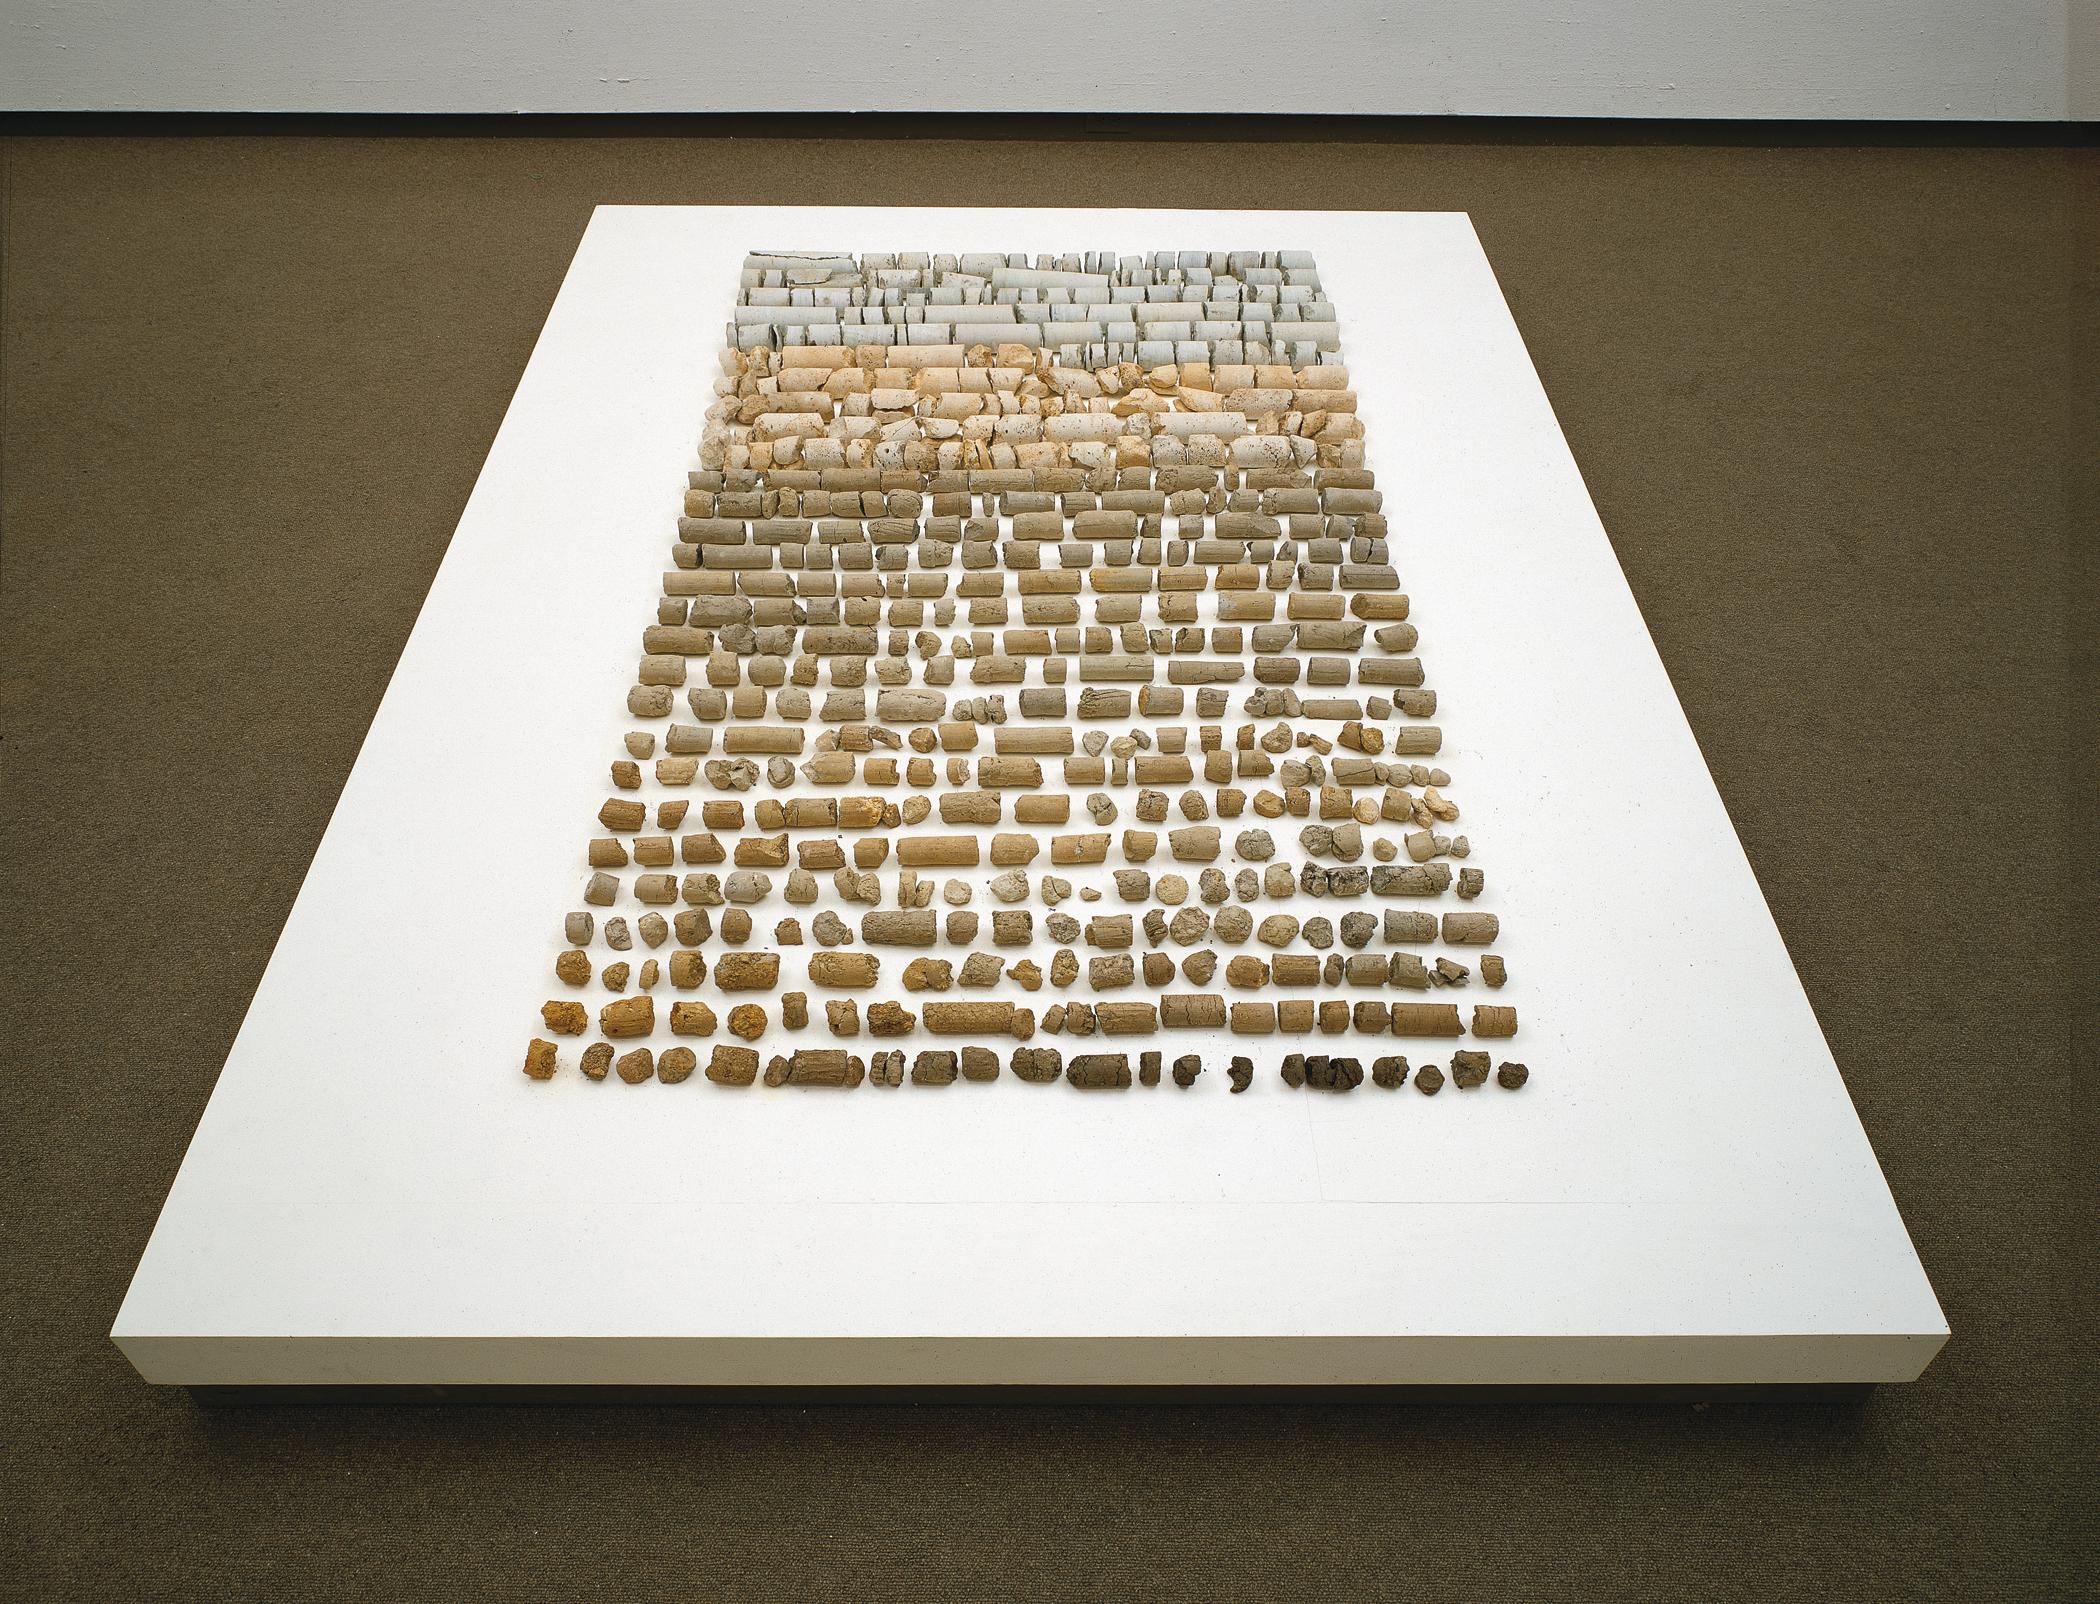 A sculpture composed of rock fragments arranged in rows and organized by color on a white platform